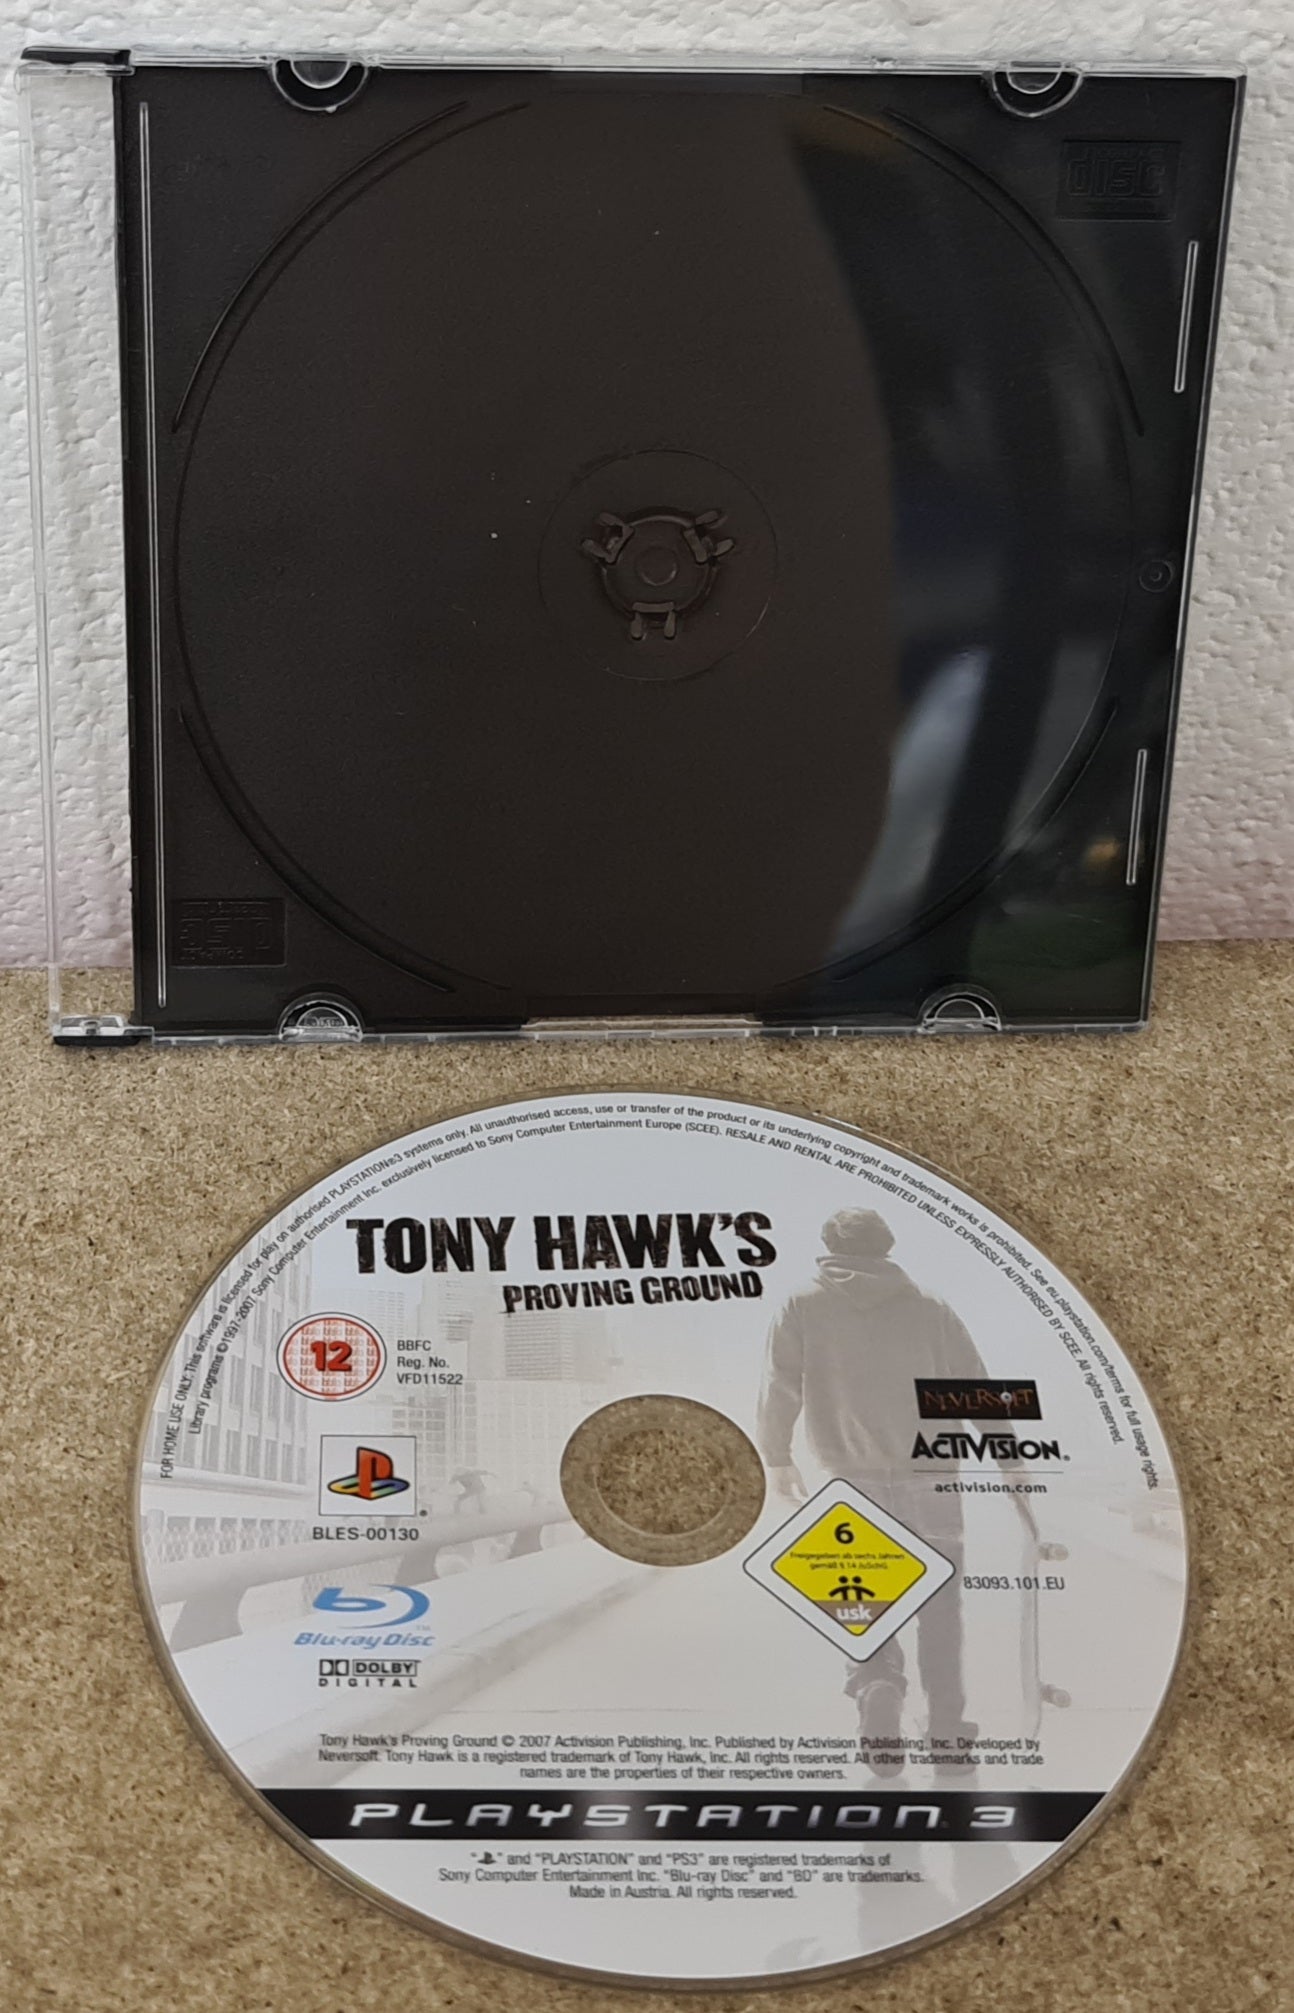 Tony Hawk's Proving Ground Sony Playstation 3 (PS3) Game Disc Only